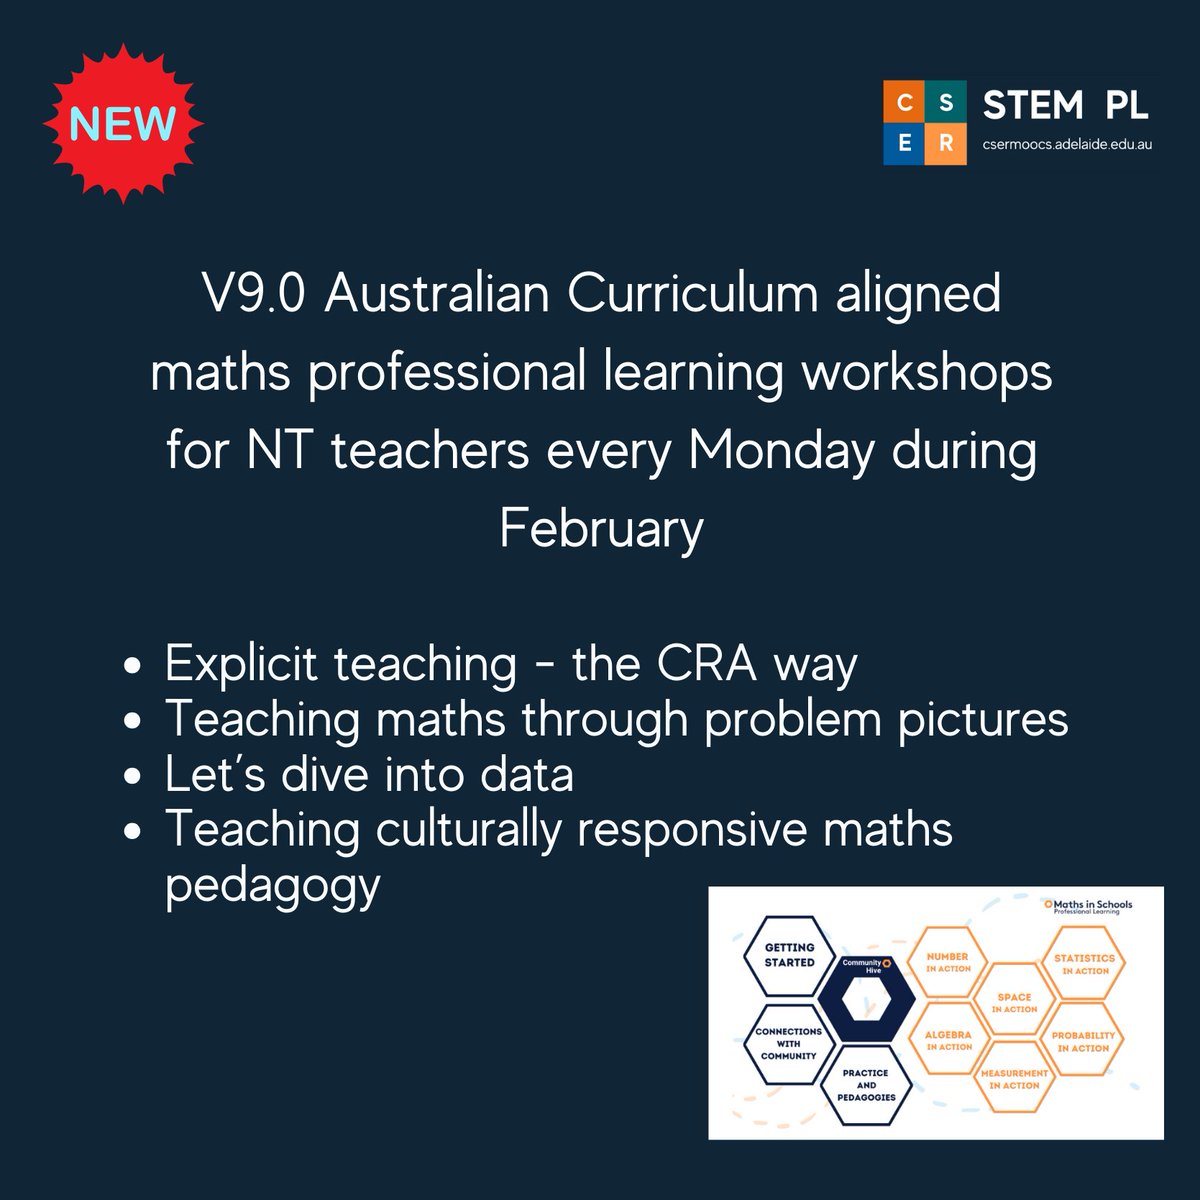 Happy new year! We are excited to be back & looking forward to collaborating with teachers across the country! We are kickstarting the year with four face to face maths events in the Northern Territory. Find out more: ow.ly/pYmN50QtRFY #Darwin #Palmerston #maths #teachers